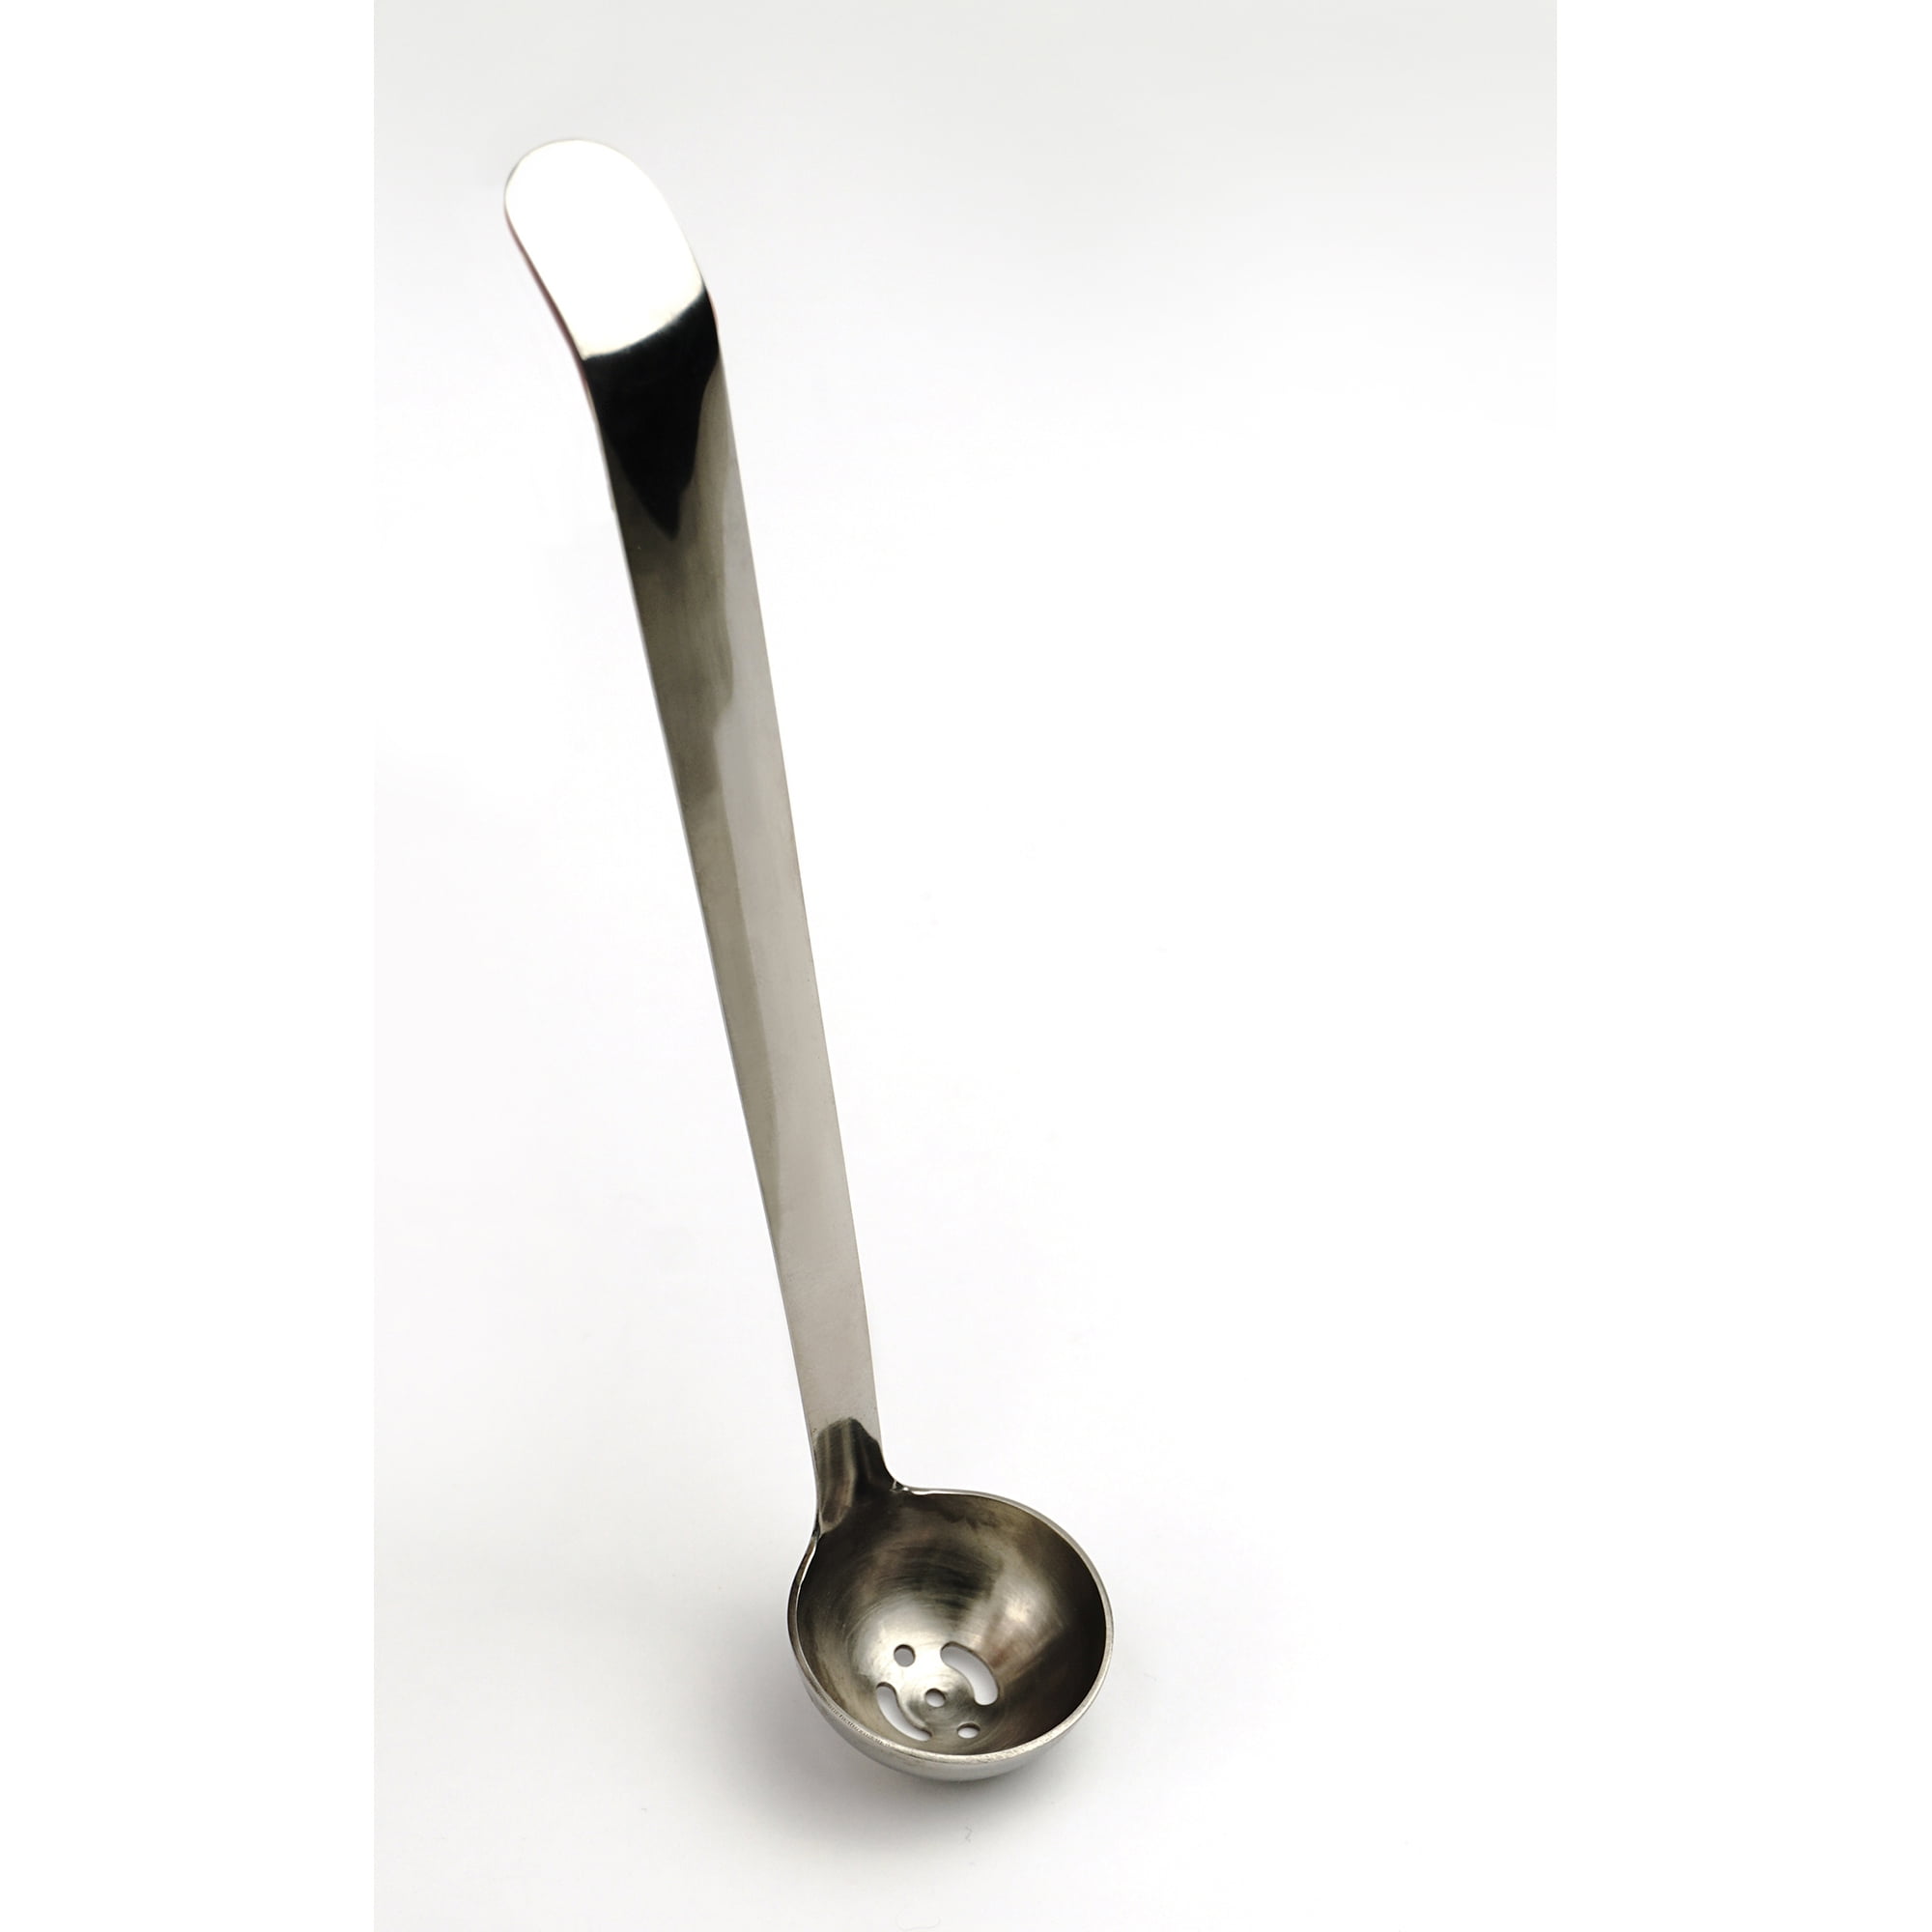 VOLLRATH Ladle 4 OZ Stainless Steel Dipper Scooper Soup Server Industrial Qualit 